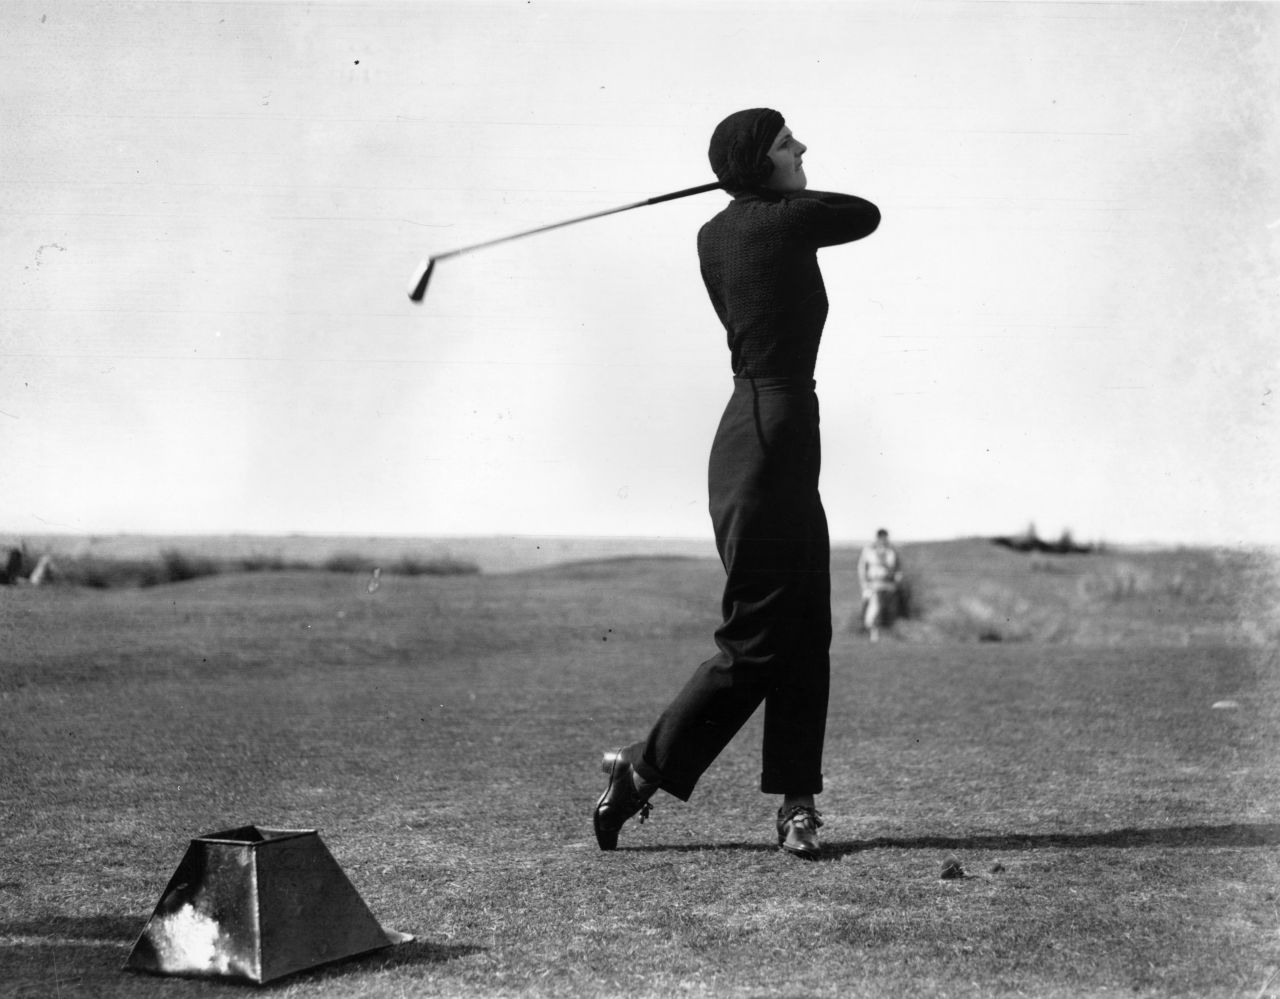 The elegant and striking figure of Gloria Minoprio caused a sensation at the English Ladies' Golf Championship in 1933 when she arrived carrying just one club and wearing trousers -- a <a href="http://www.scottishgolfhistory.org/early-womens-golf/iv-womens-golf-the-fashion-pages-/" target="_blank" target="_blank">first for a women golfer</a>. <br /><br />"She turned up using a one iron and wore an iconic outfit -- a pair of navy trousers quite high-waisted and well-fitting, a roll-neck sweater and a turban, all matching navy colors," Fleming says.<br /><br />"From that period onwards, more golfing women thought, 'Well, maybe I could wear slightly more interesting fashion choices on the golf course.'"<br /><br /><br /><br /> 